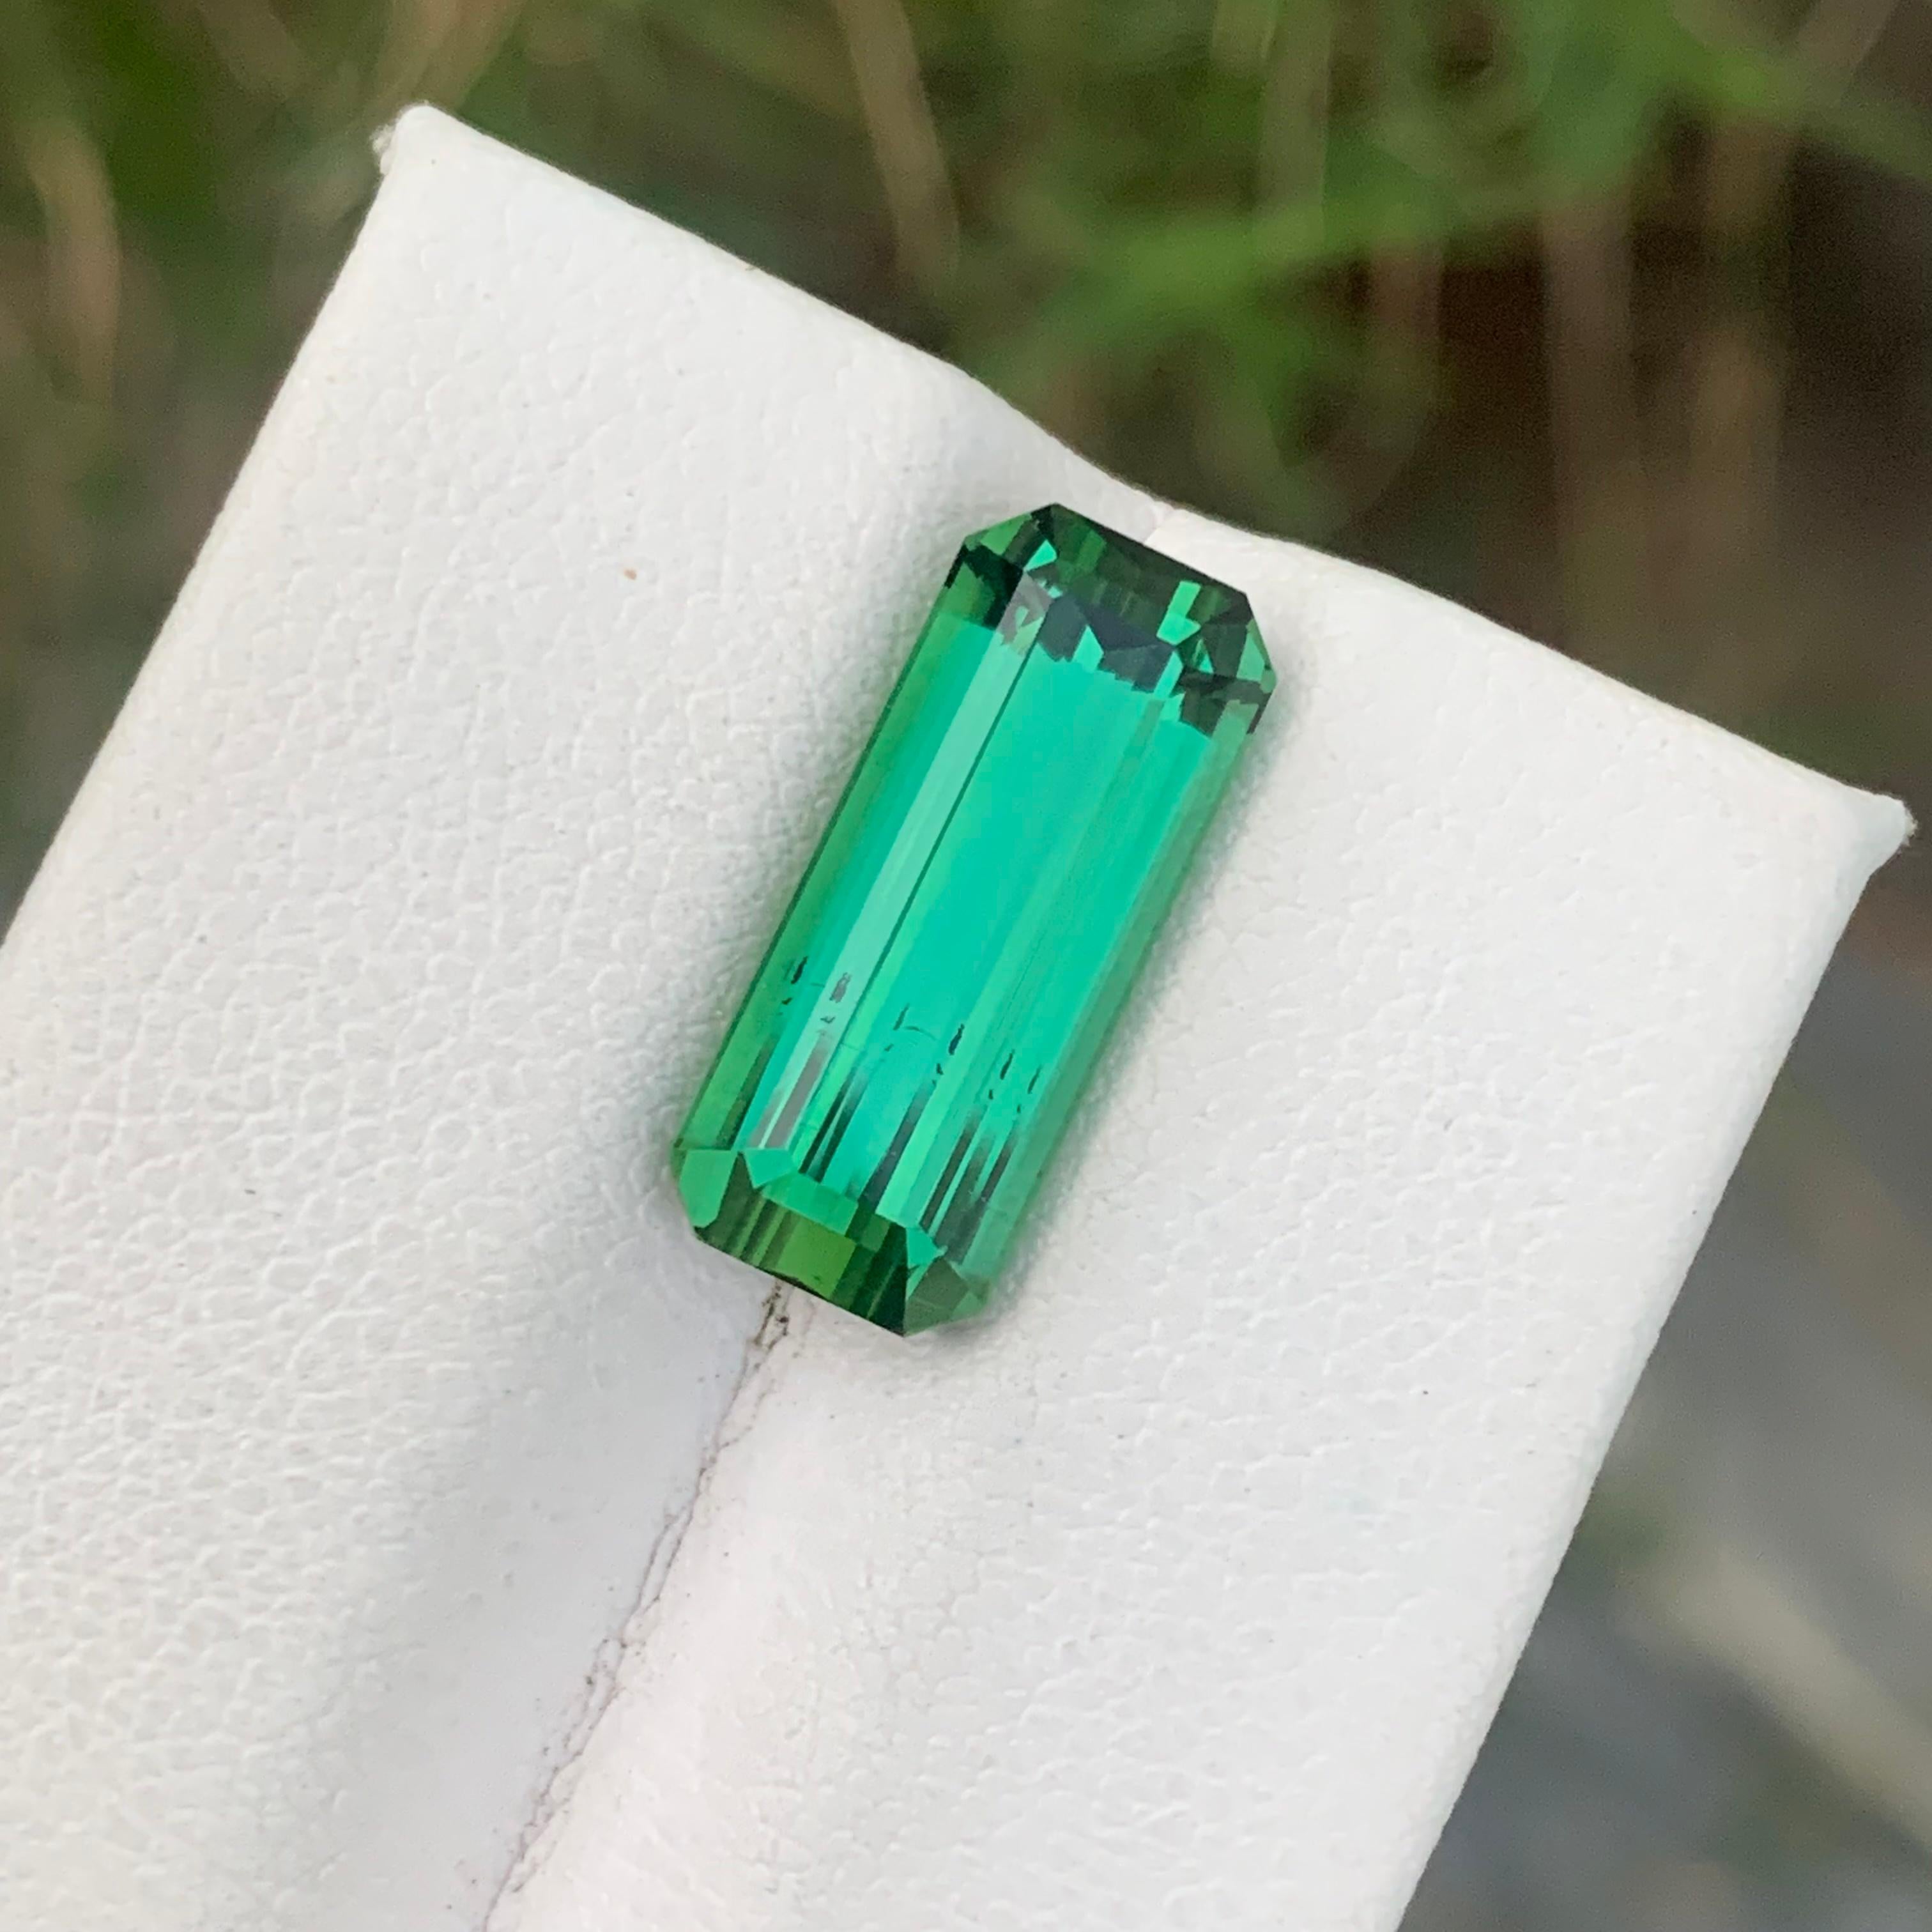 Faceted Green Tourmaline 
Weight: 6.60 Carat
Dimension: 16.6x7.1x6.3 Mm
Origin: Kunar Afghanistan 
Shape: Emerald 
Color: Bright Green 
Quality: SI / Eye Clean 
Certificate: On Demand 
Heated/Treatment: None
.
Bright green tourmaline, also known as